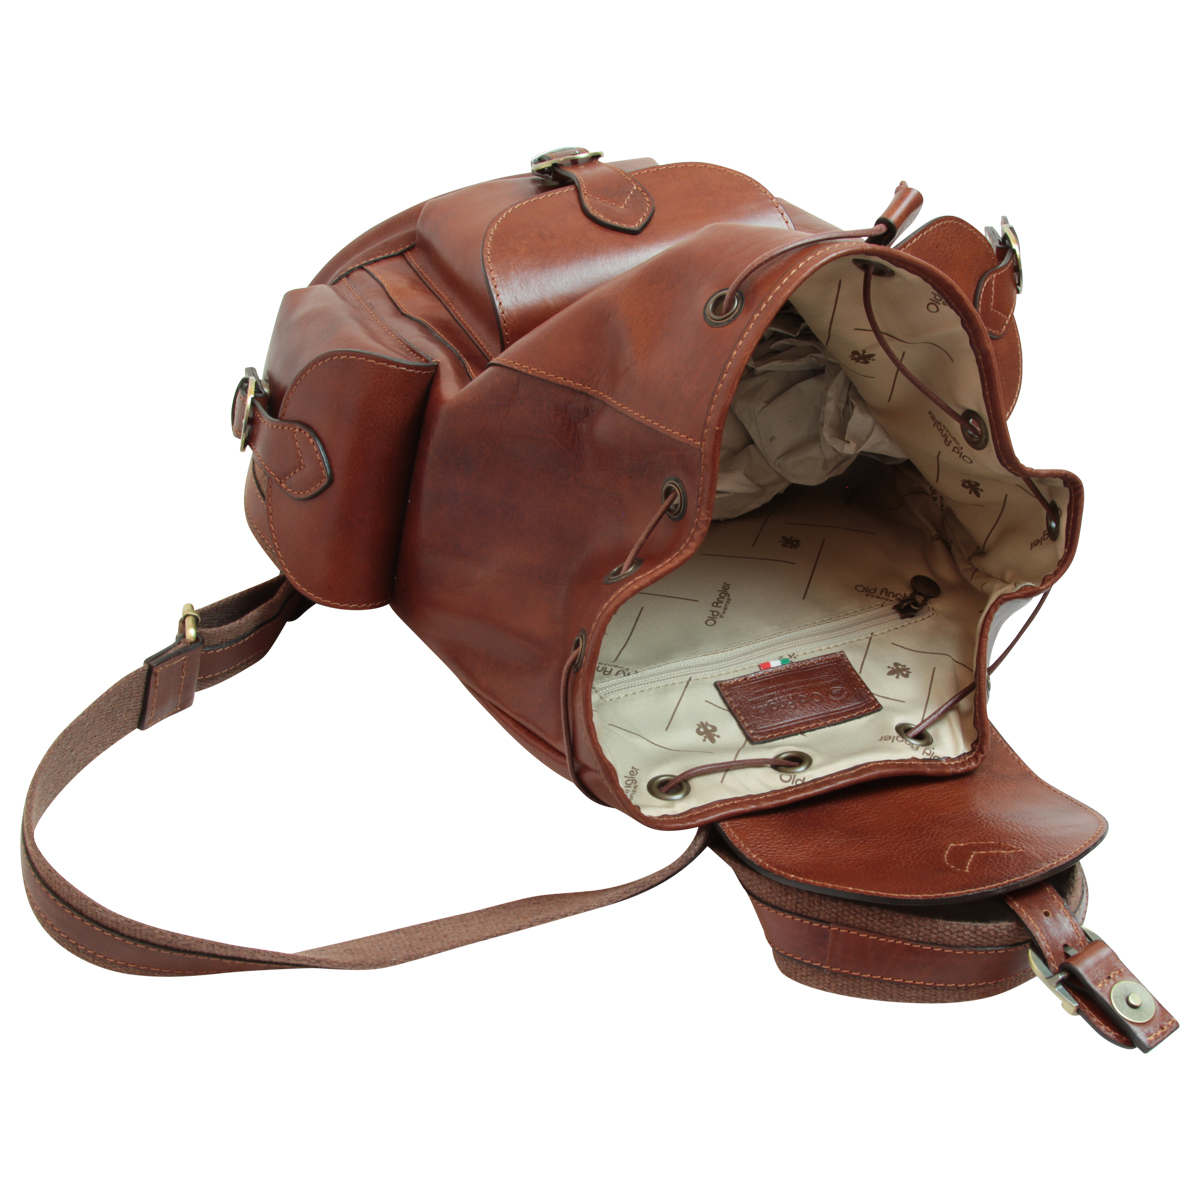 Leather backpack with 3 exterior pockets - Brown | 109105MA UK | Old Angler Firenze